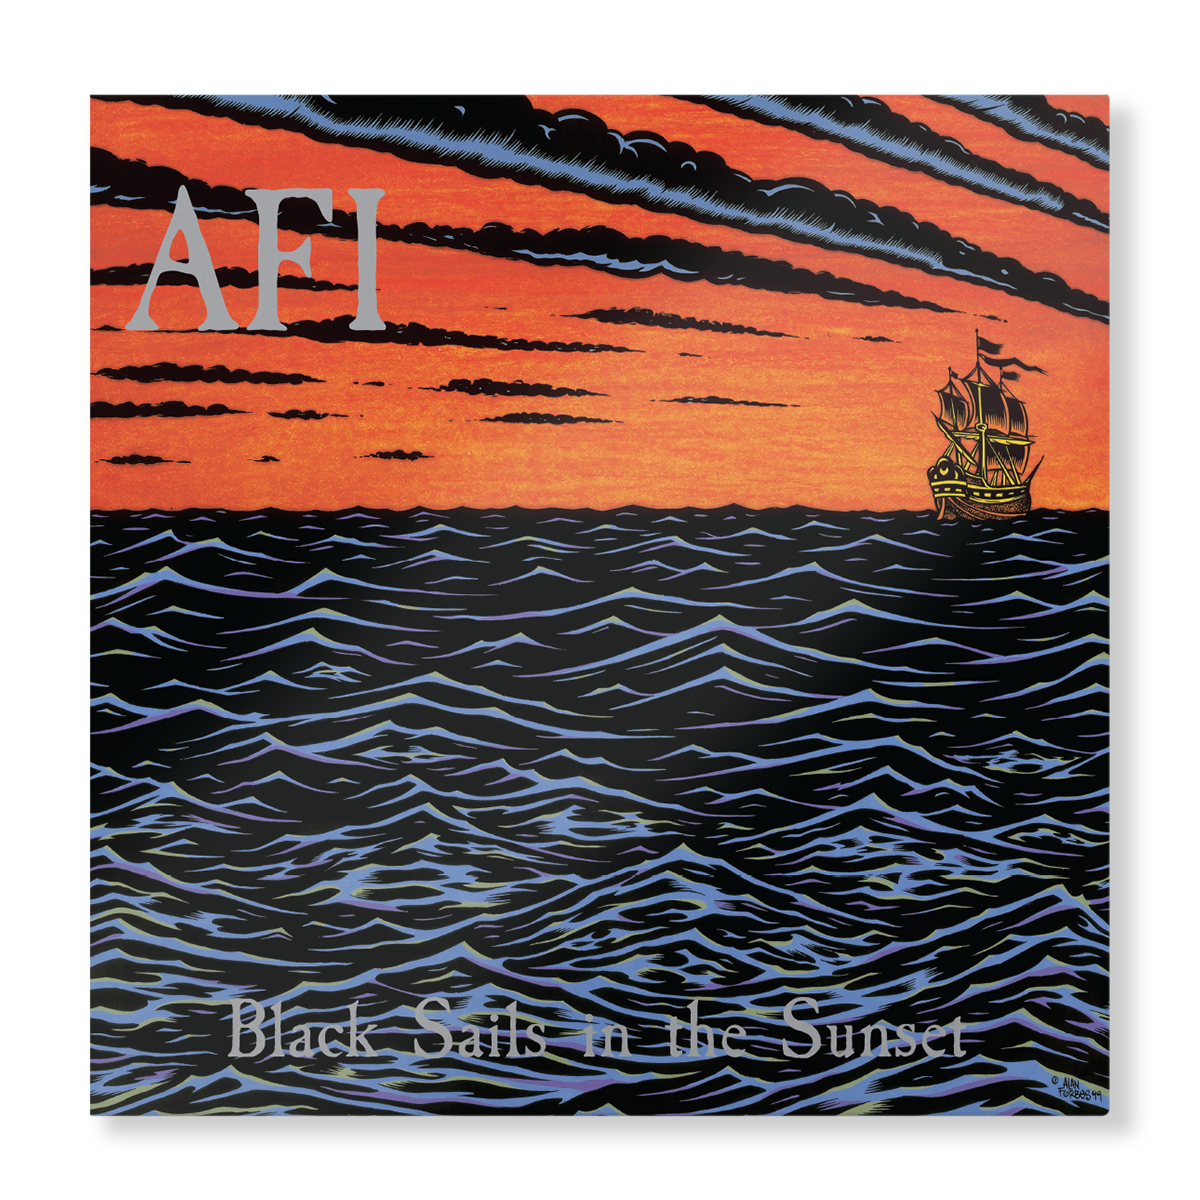 Black Sails in the Sunset 25th Anniversary (Exclusive LP, Tropical Sunset Pressing - Limited Edition of 500)